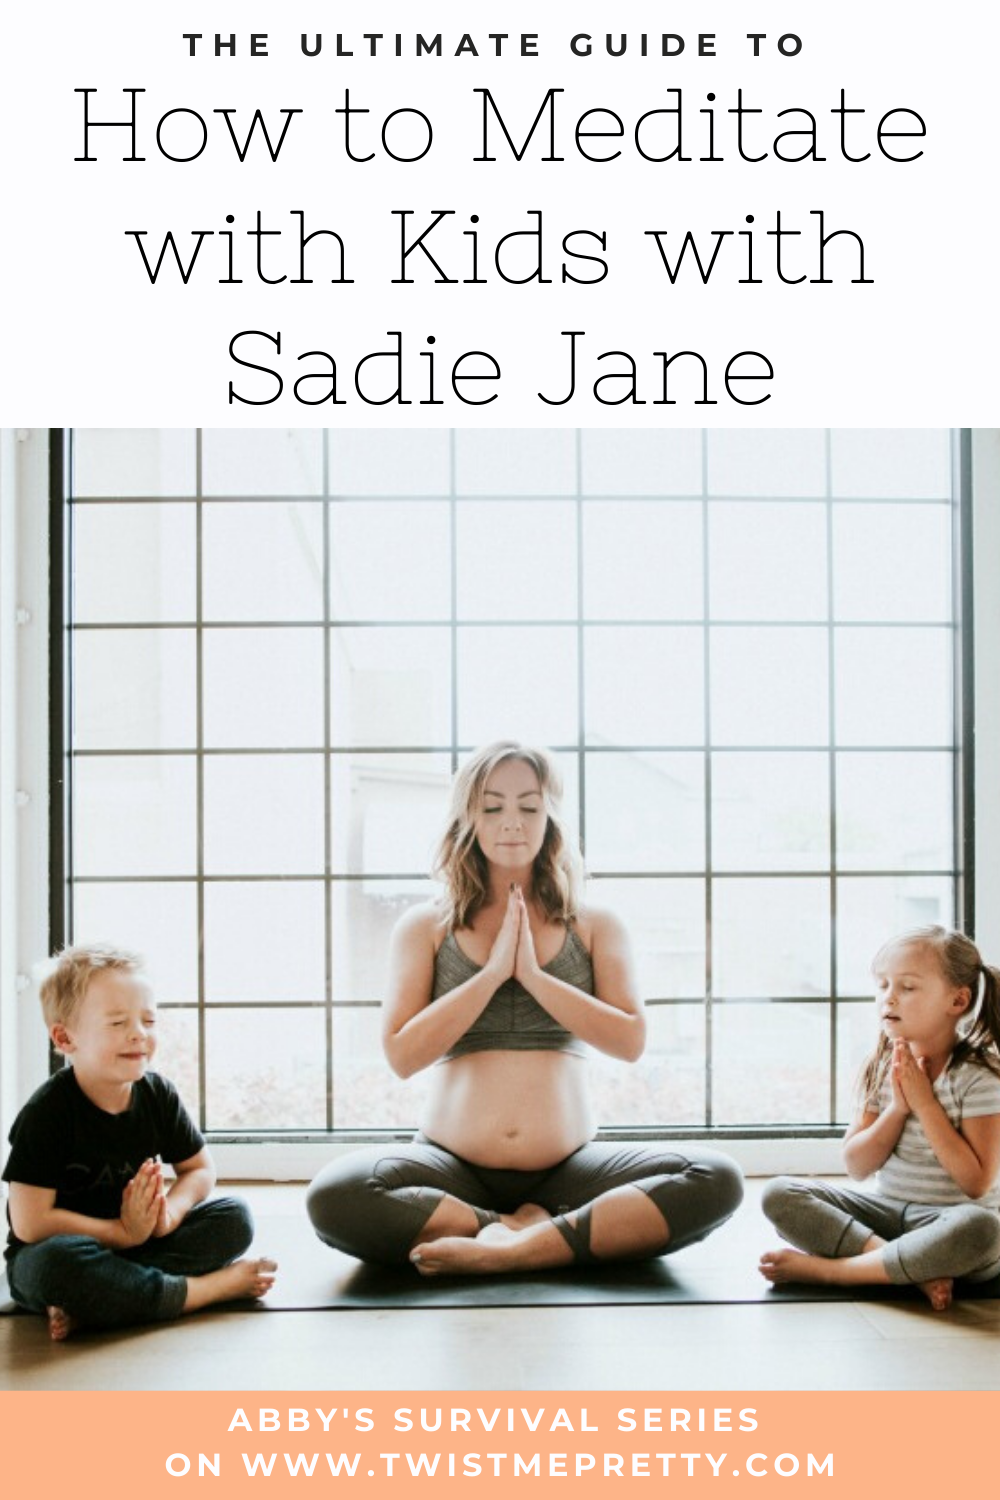 The Ultimate Guide to How to Meditate with Your Kids with Sadie Jane. A part of Abby's Survival Series www.TwistMePretty.com